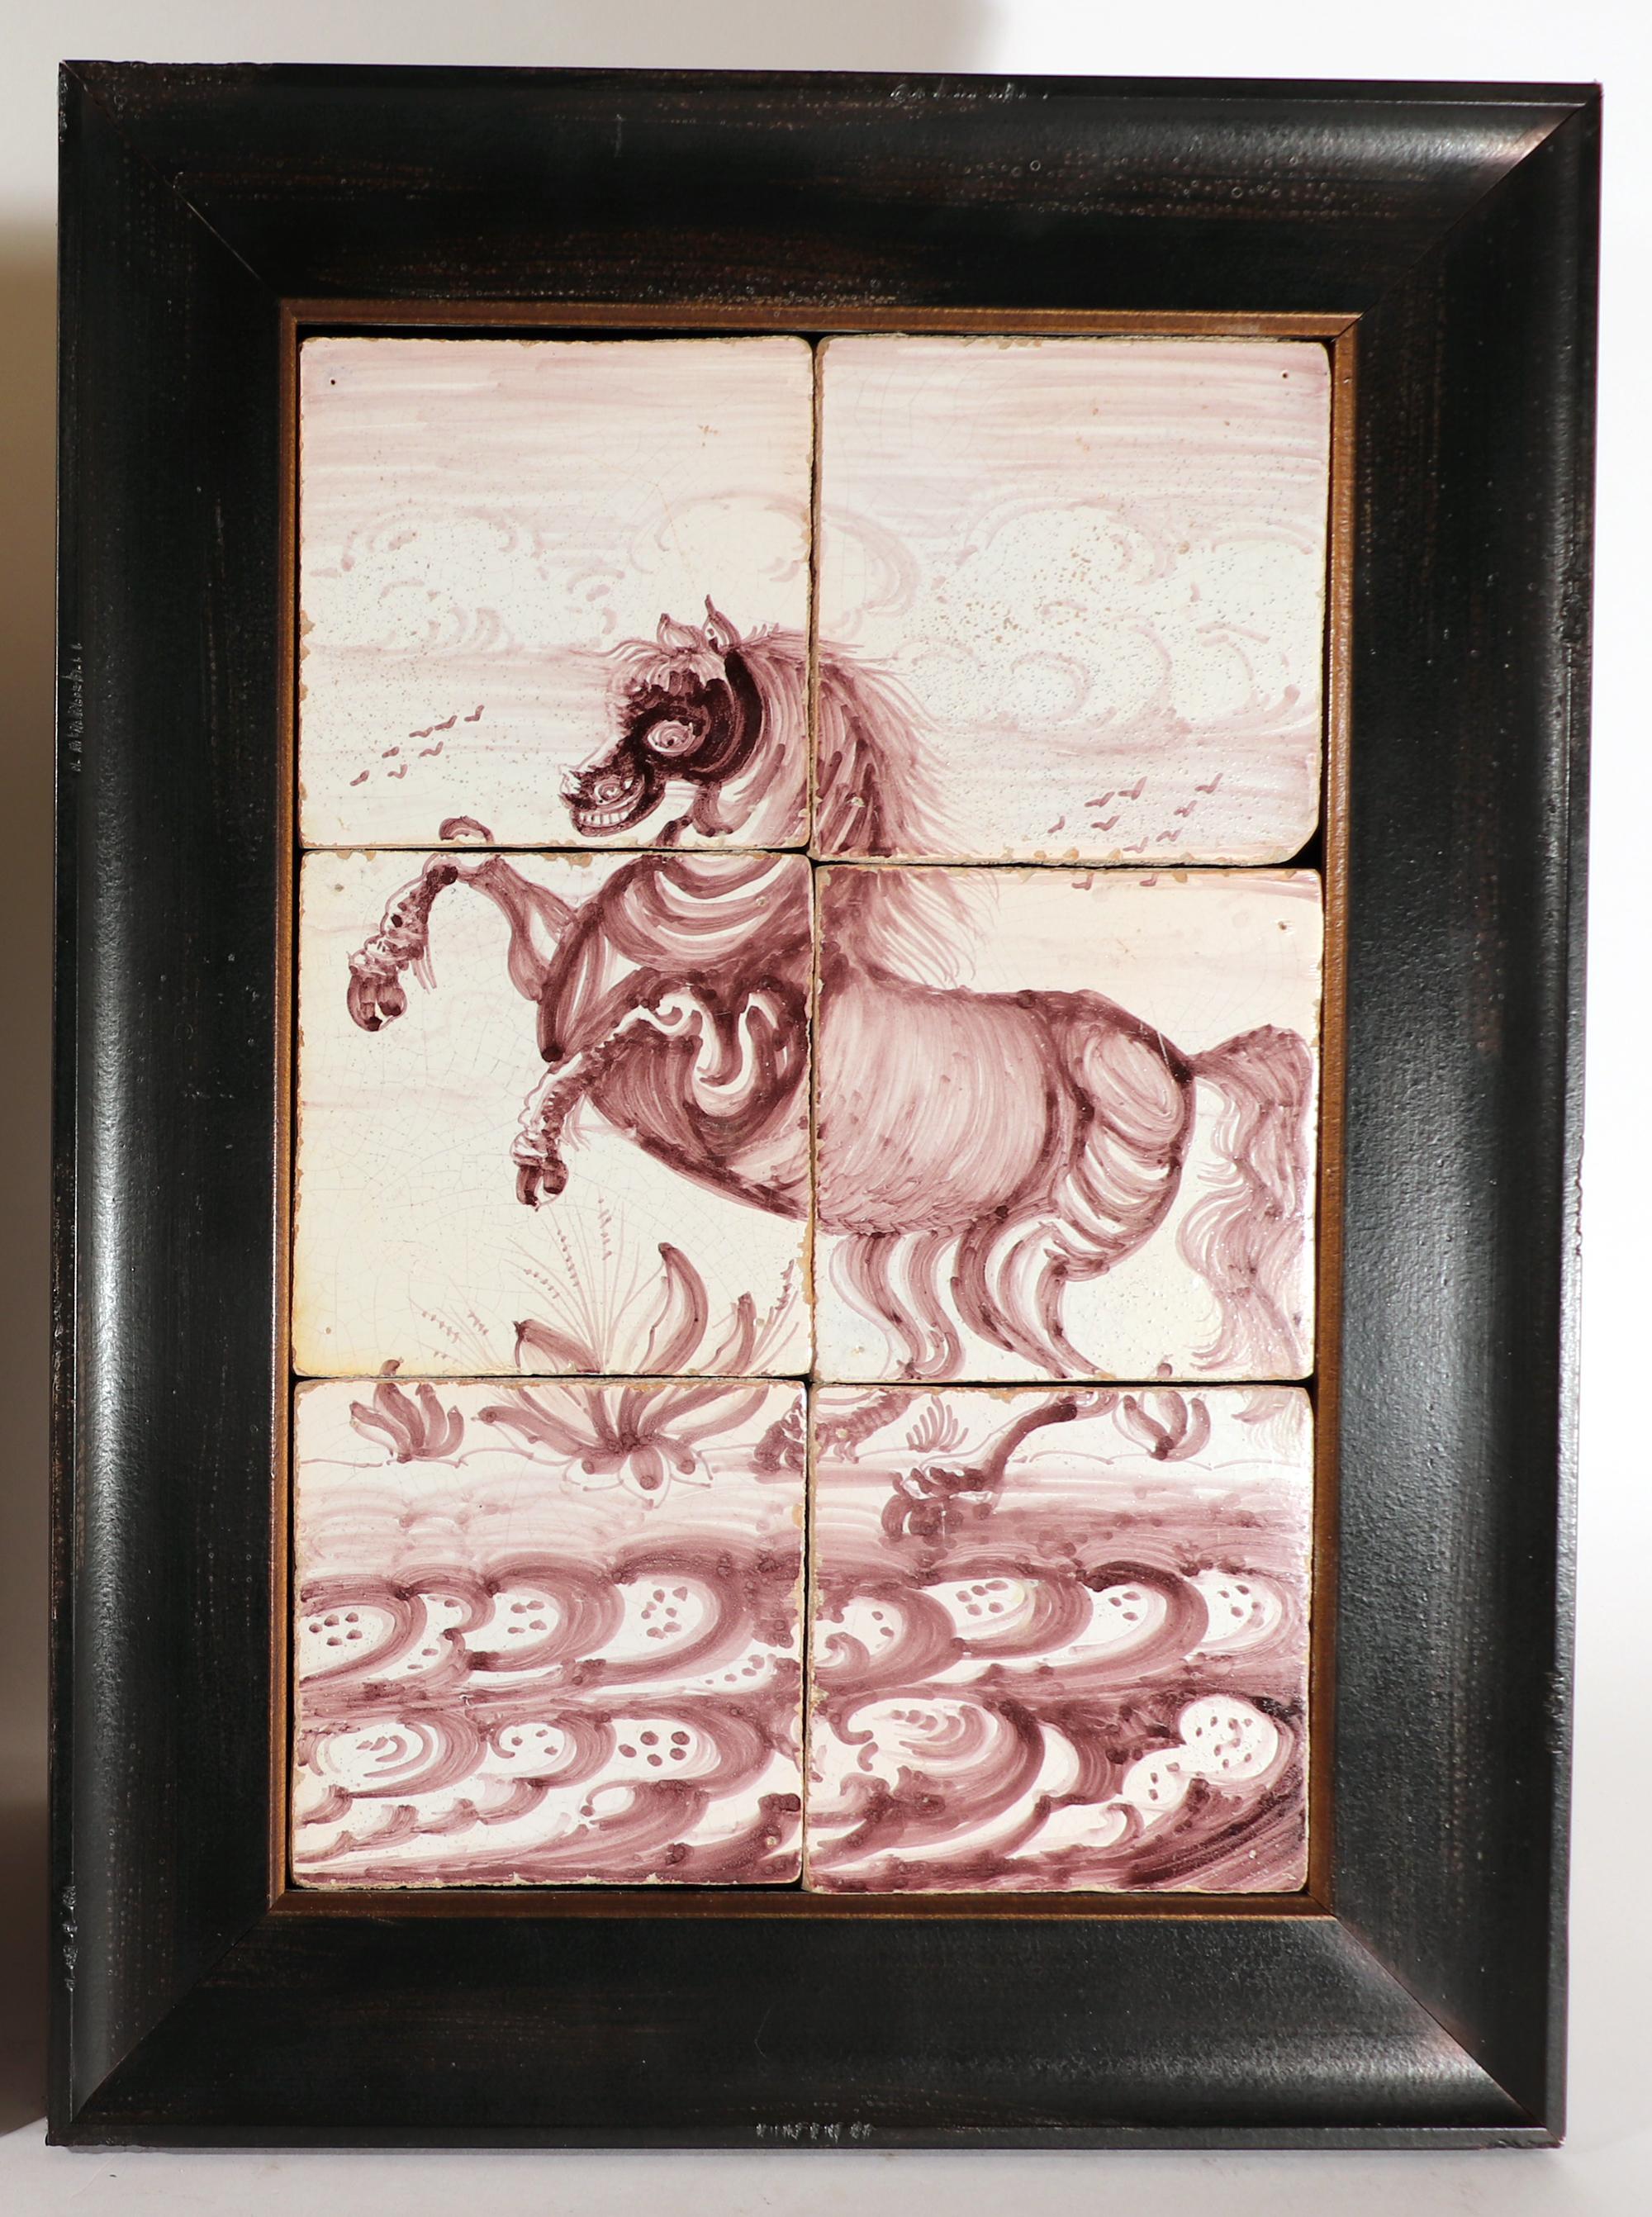 Georgian 18th Century Rotterdam Dutch Delft Tiles Framed Pictures of Rearing Horses For Sale